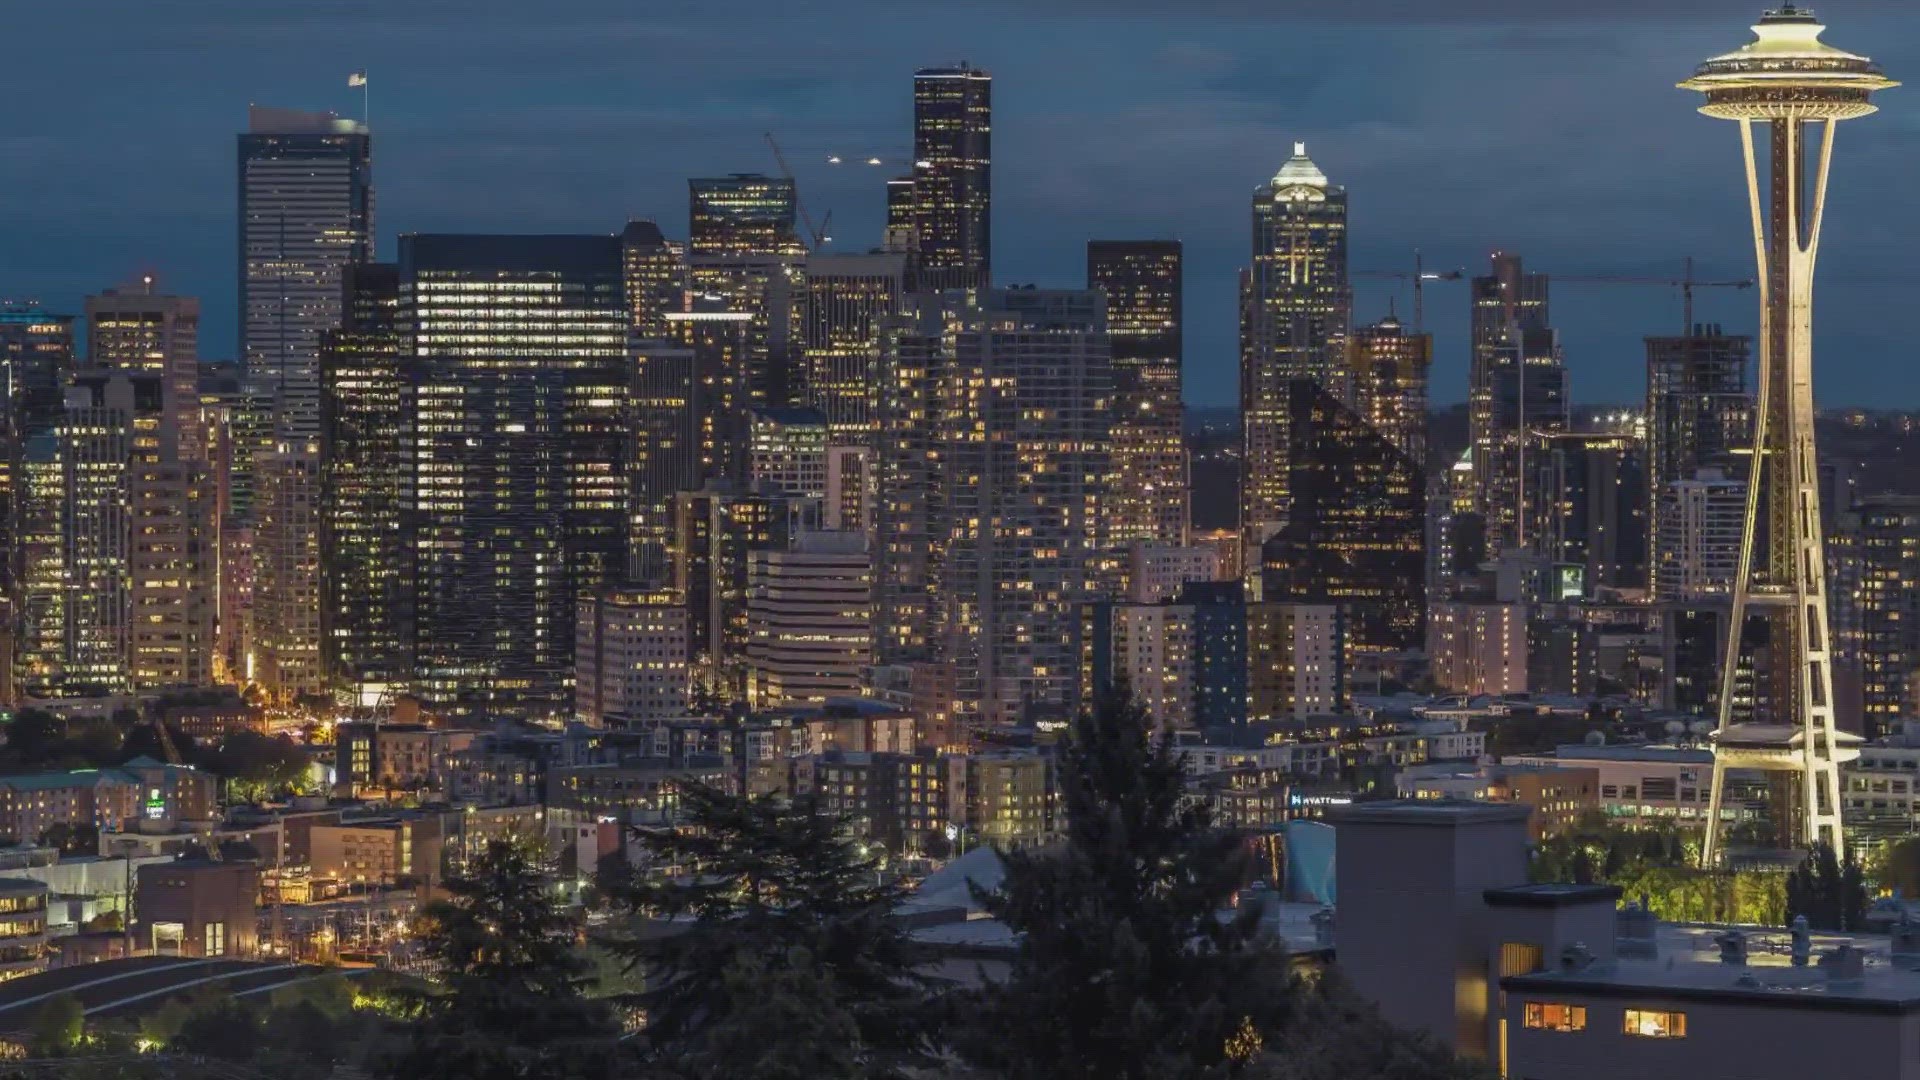 Nearly 24 million people visited Seattle and King County in 2022.